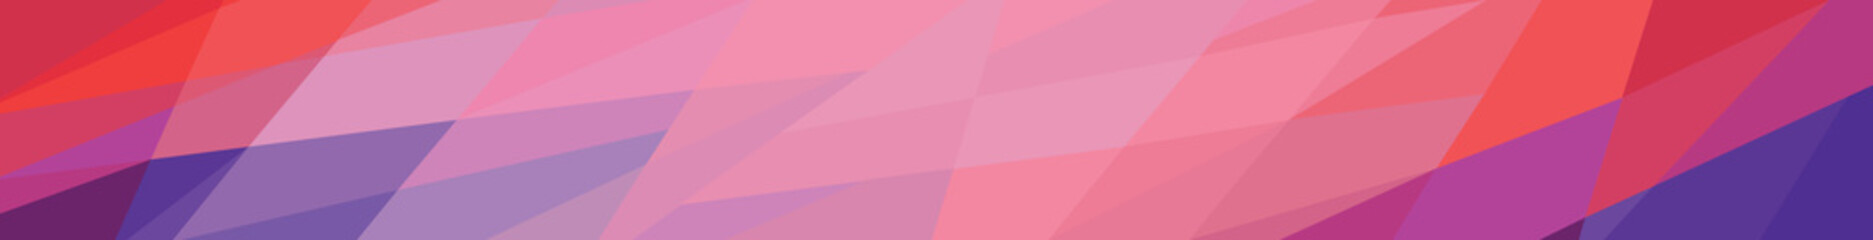 Support for LGBTQ pride. Colorful backgrounds. Templates for banners, flyers.